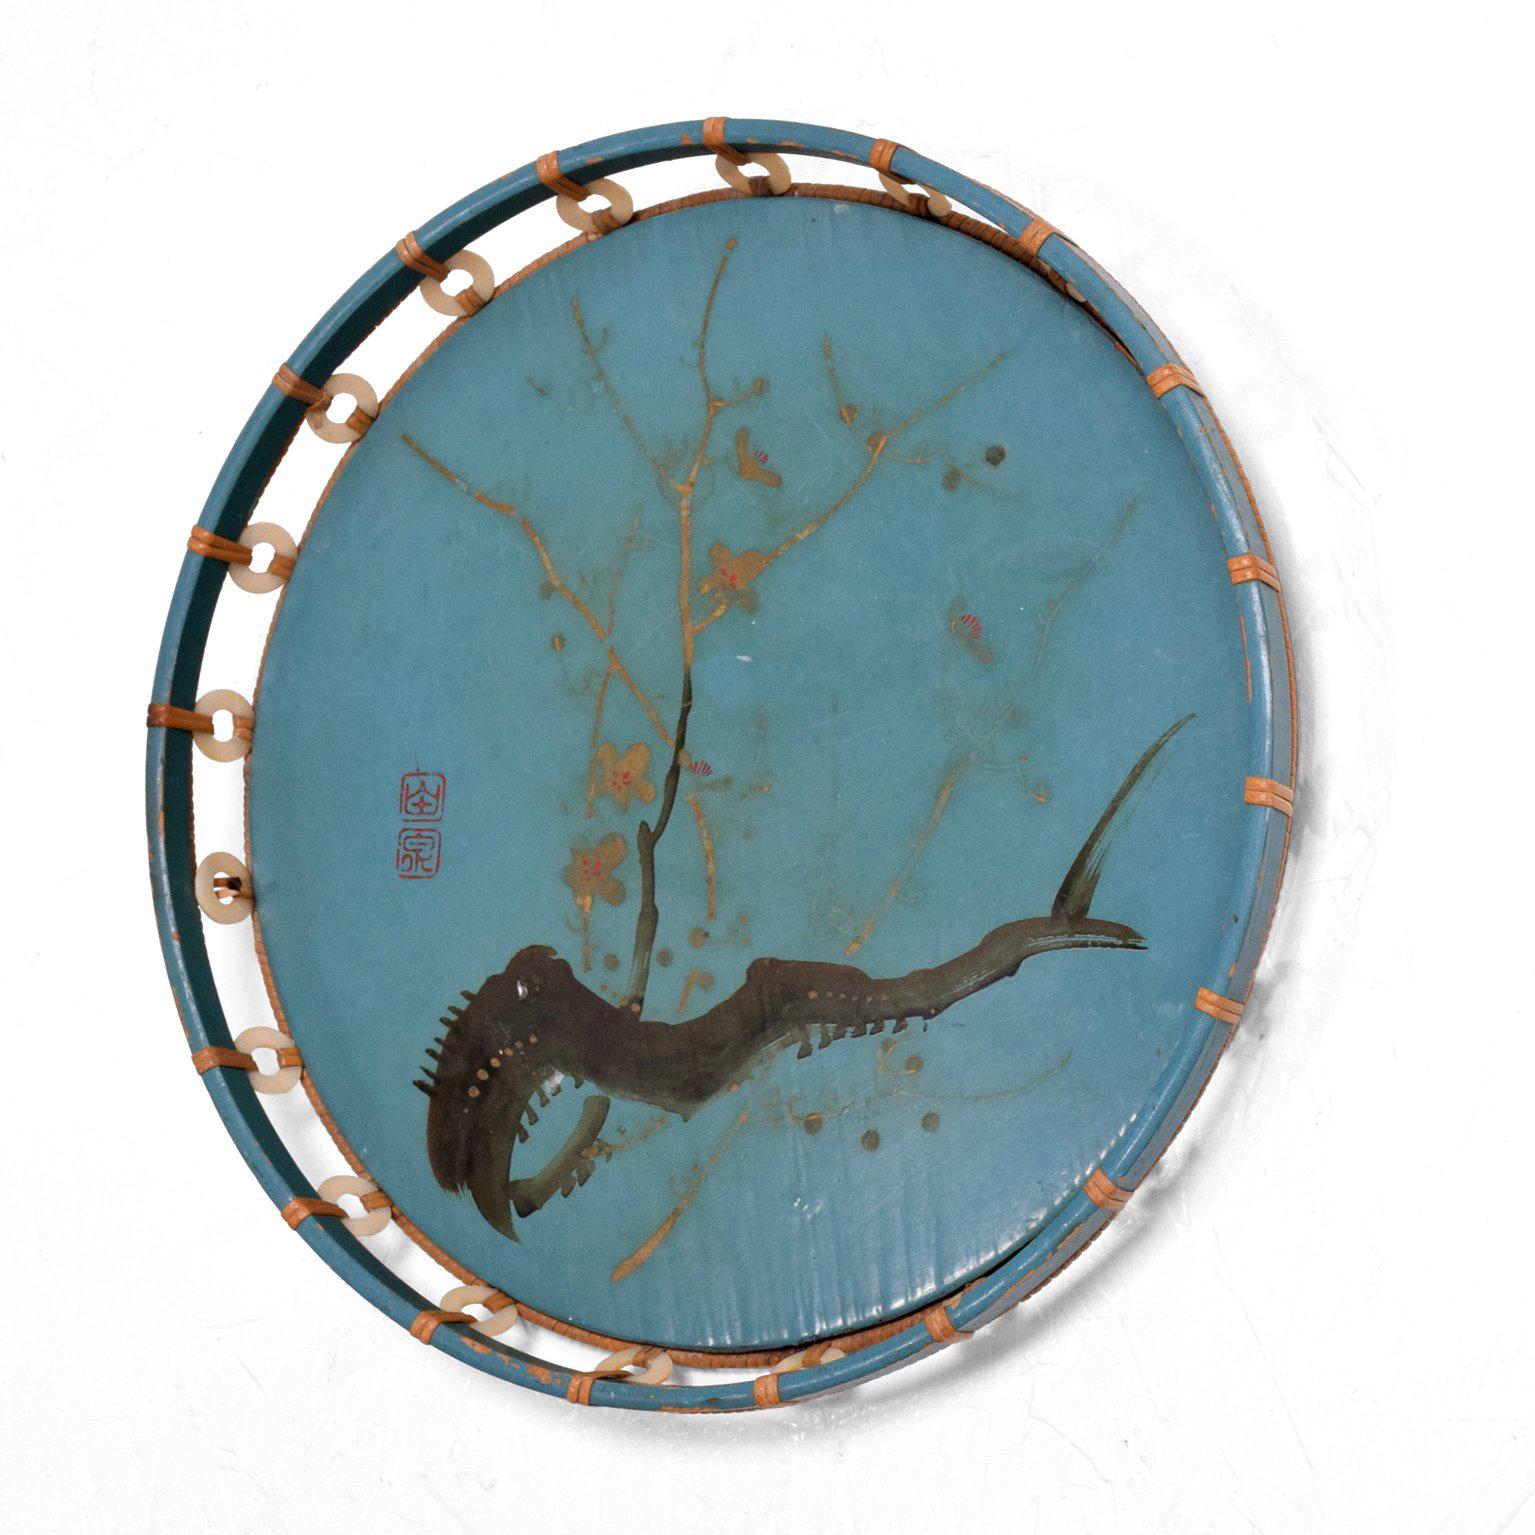 For your consideration a beautiful decorative plate hand-painted.
Light blue color with black and gold paint and signed in red.

The tray is secured with patinated cane.
The back pane is glossy black with vintage patina. It can be hung into the